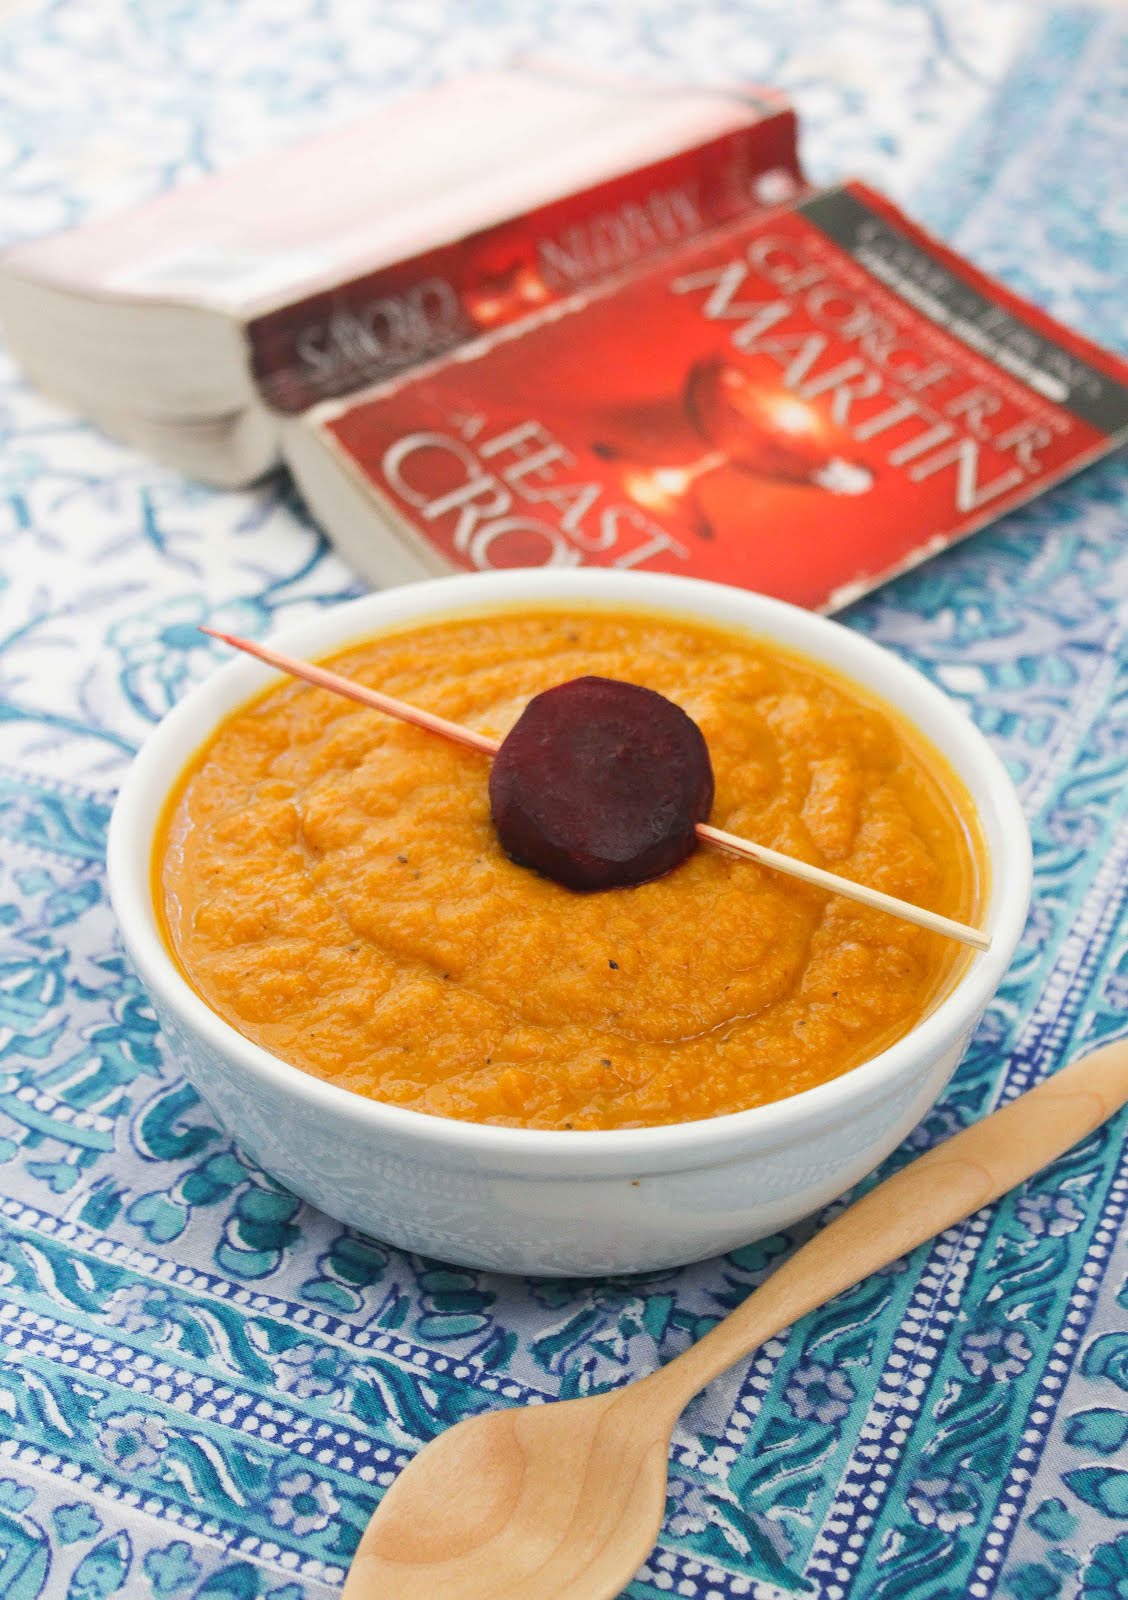 Vegetable soup from Game of Thrones - cozy up with a book next lunch time.